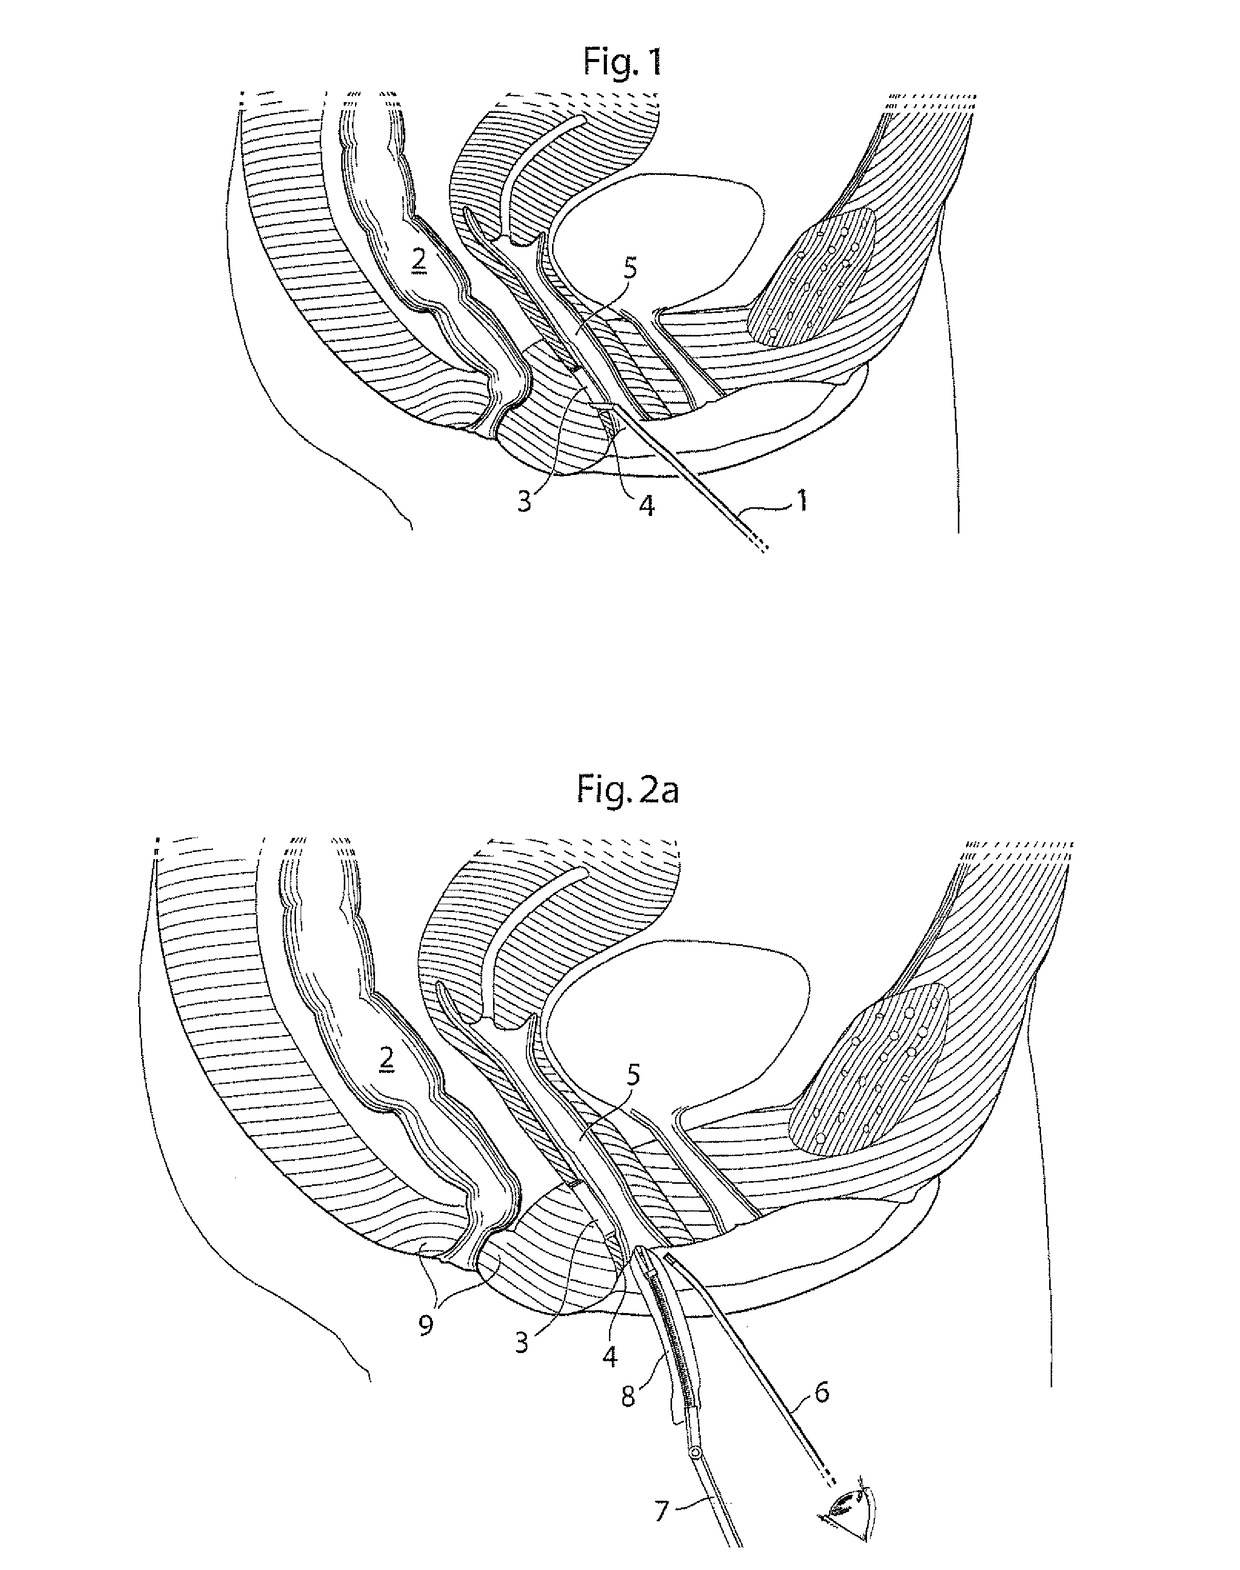 Vaginal operation method for the treatment of anal incontinence in women